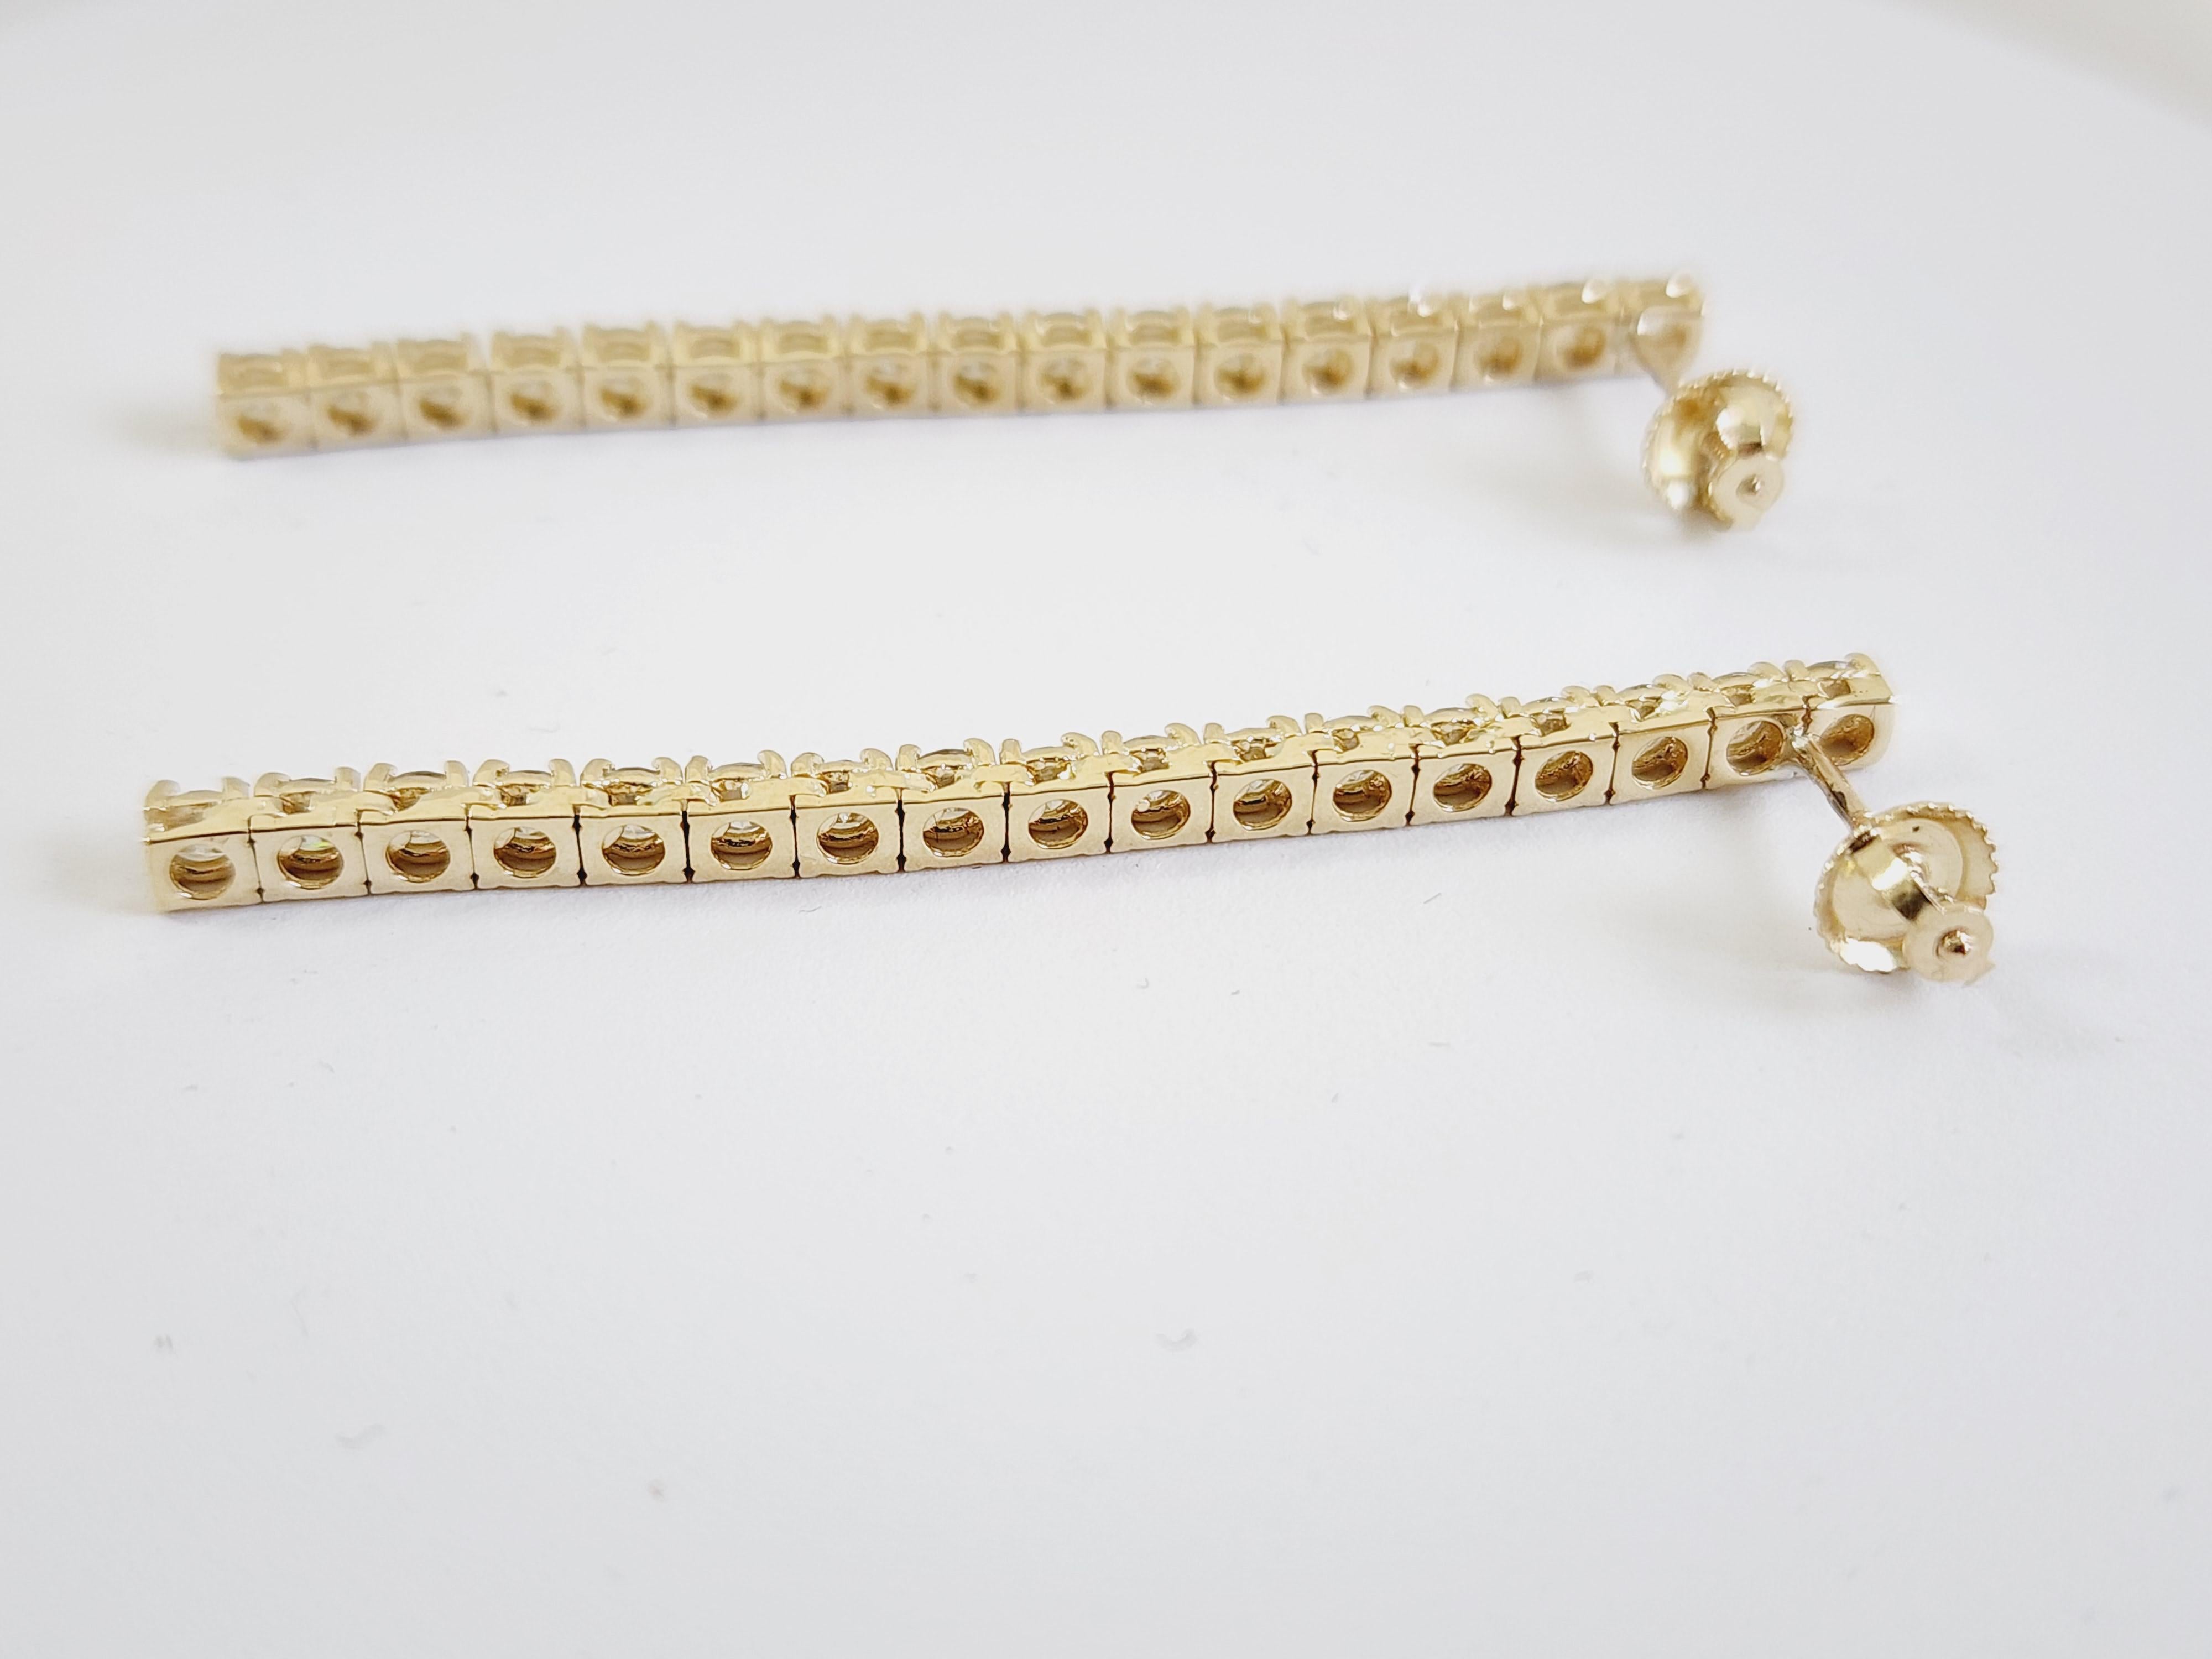 Tennis Earrings Italian made 14K yellow gold.
The total weight is 3.10 carats. Beautiful shiny natural diamonds.
The total length is 2 inch drop. screw back setting for secure wear.

*Free shipping within the US*